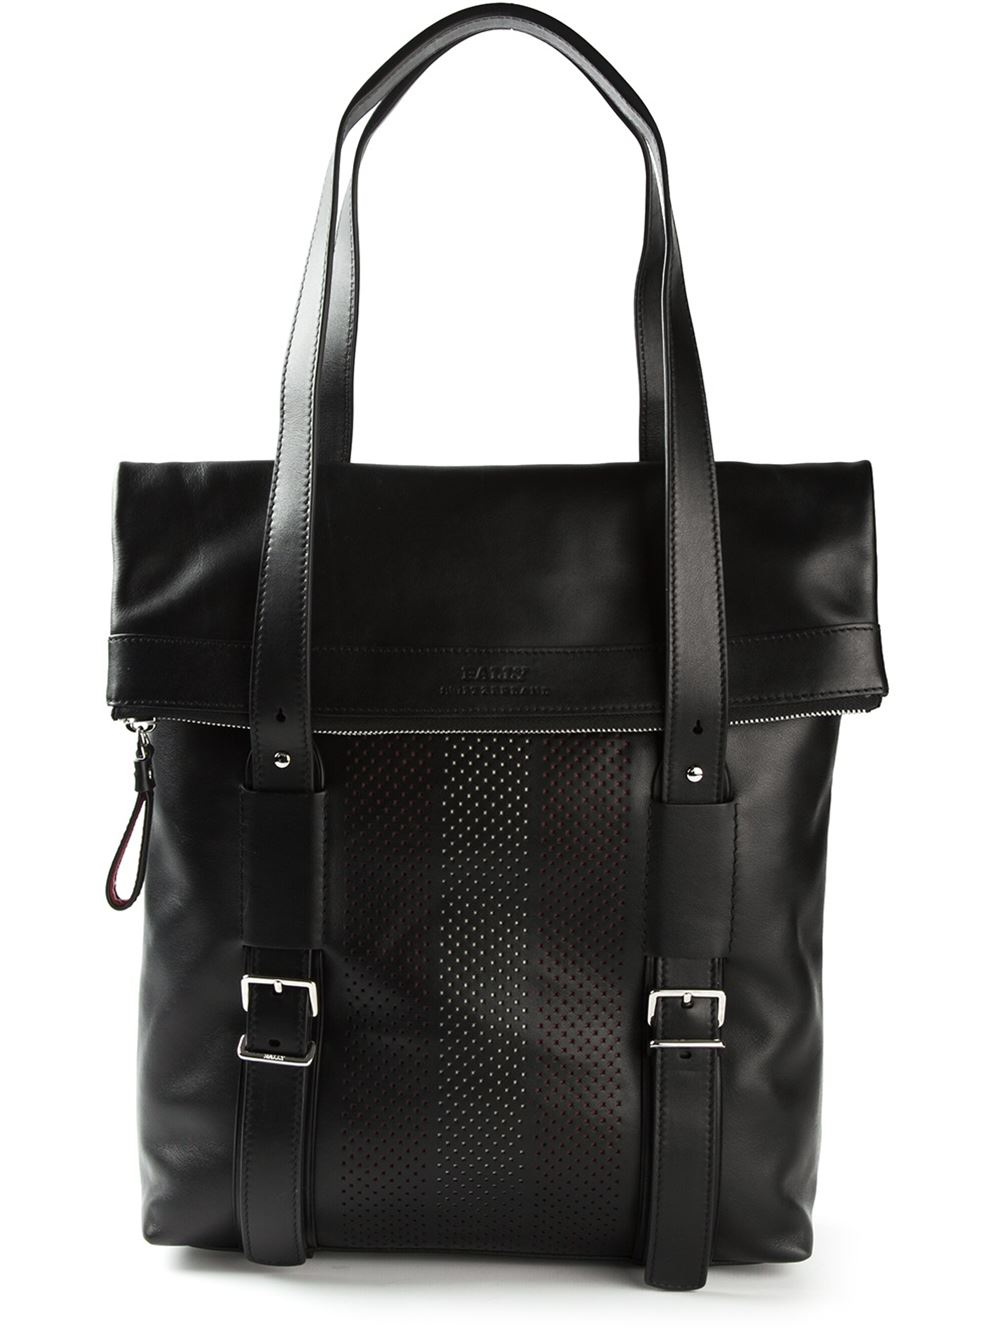 Lyst - Bally Punched Leather Tote Bag in Black for Men